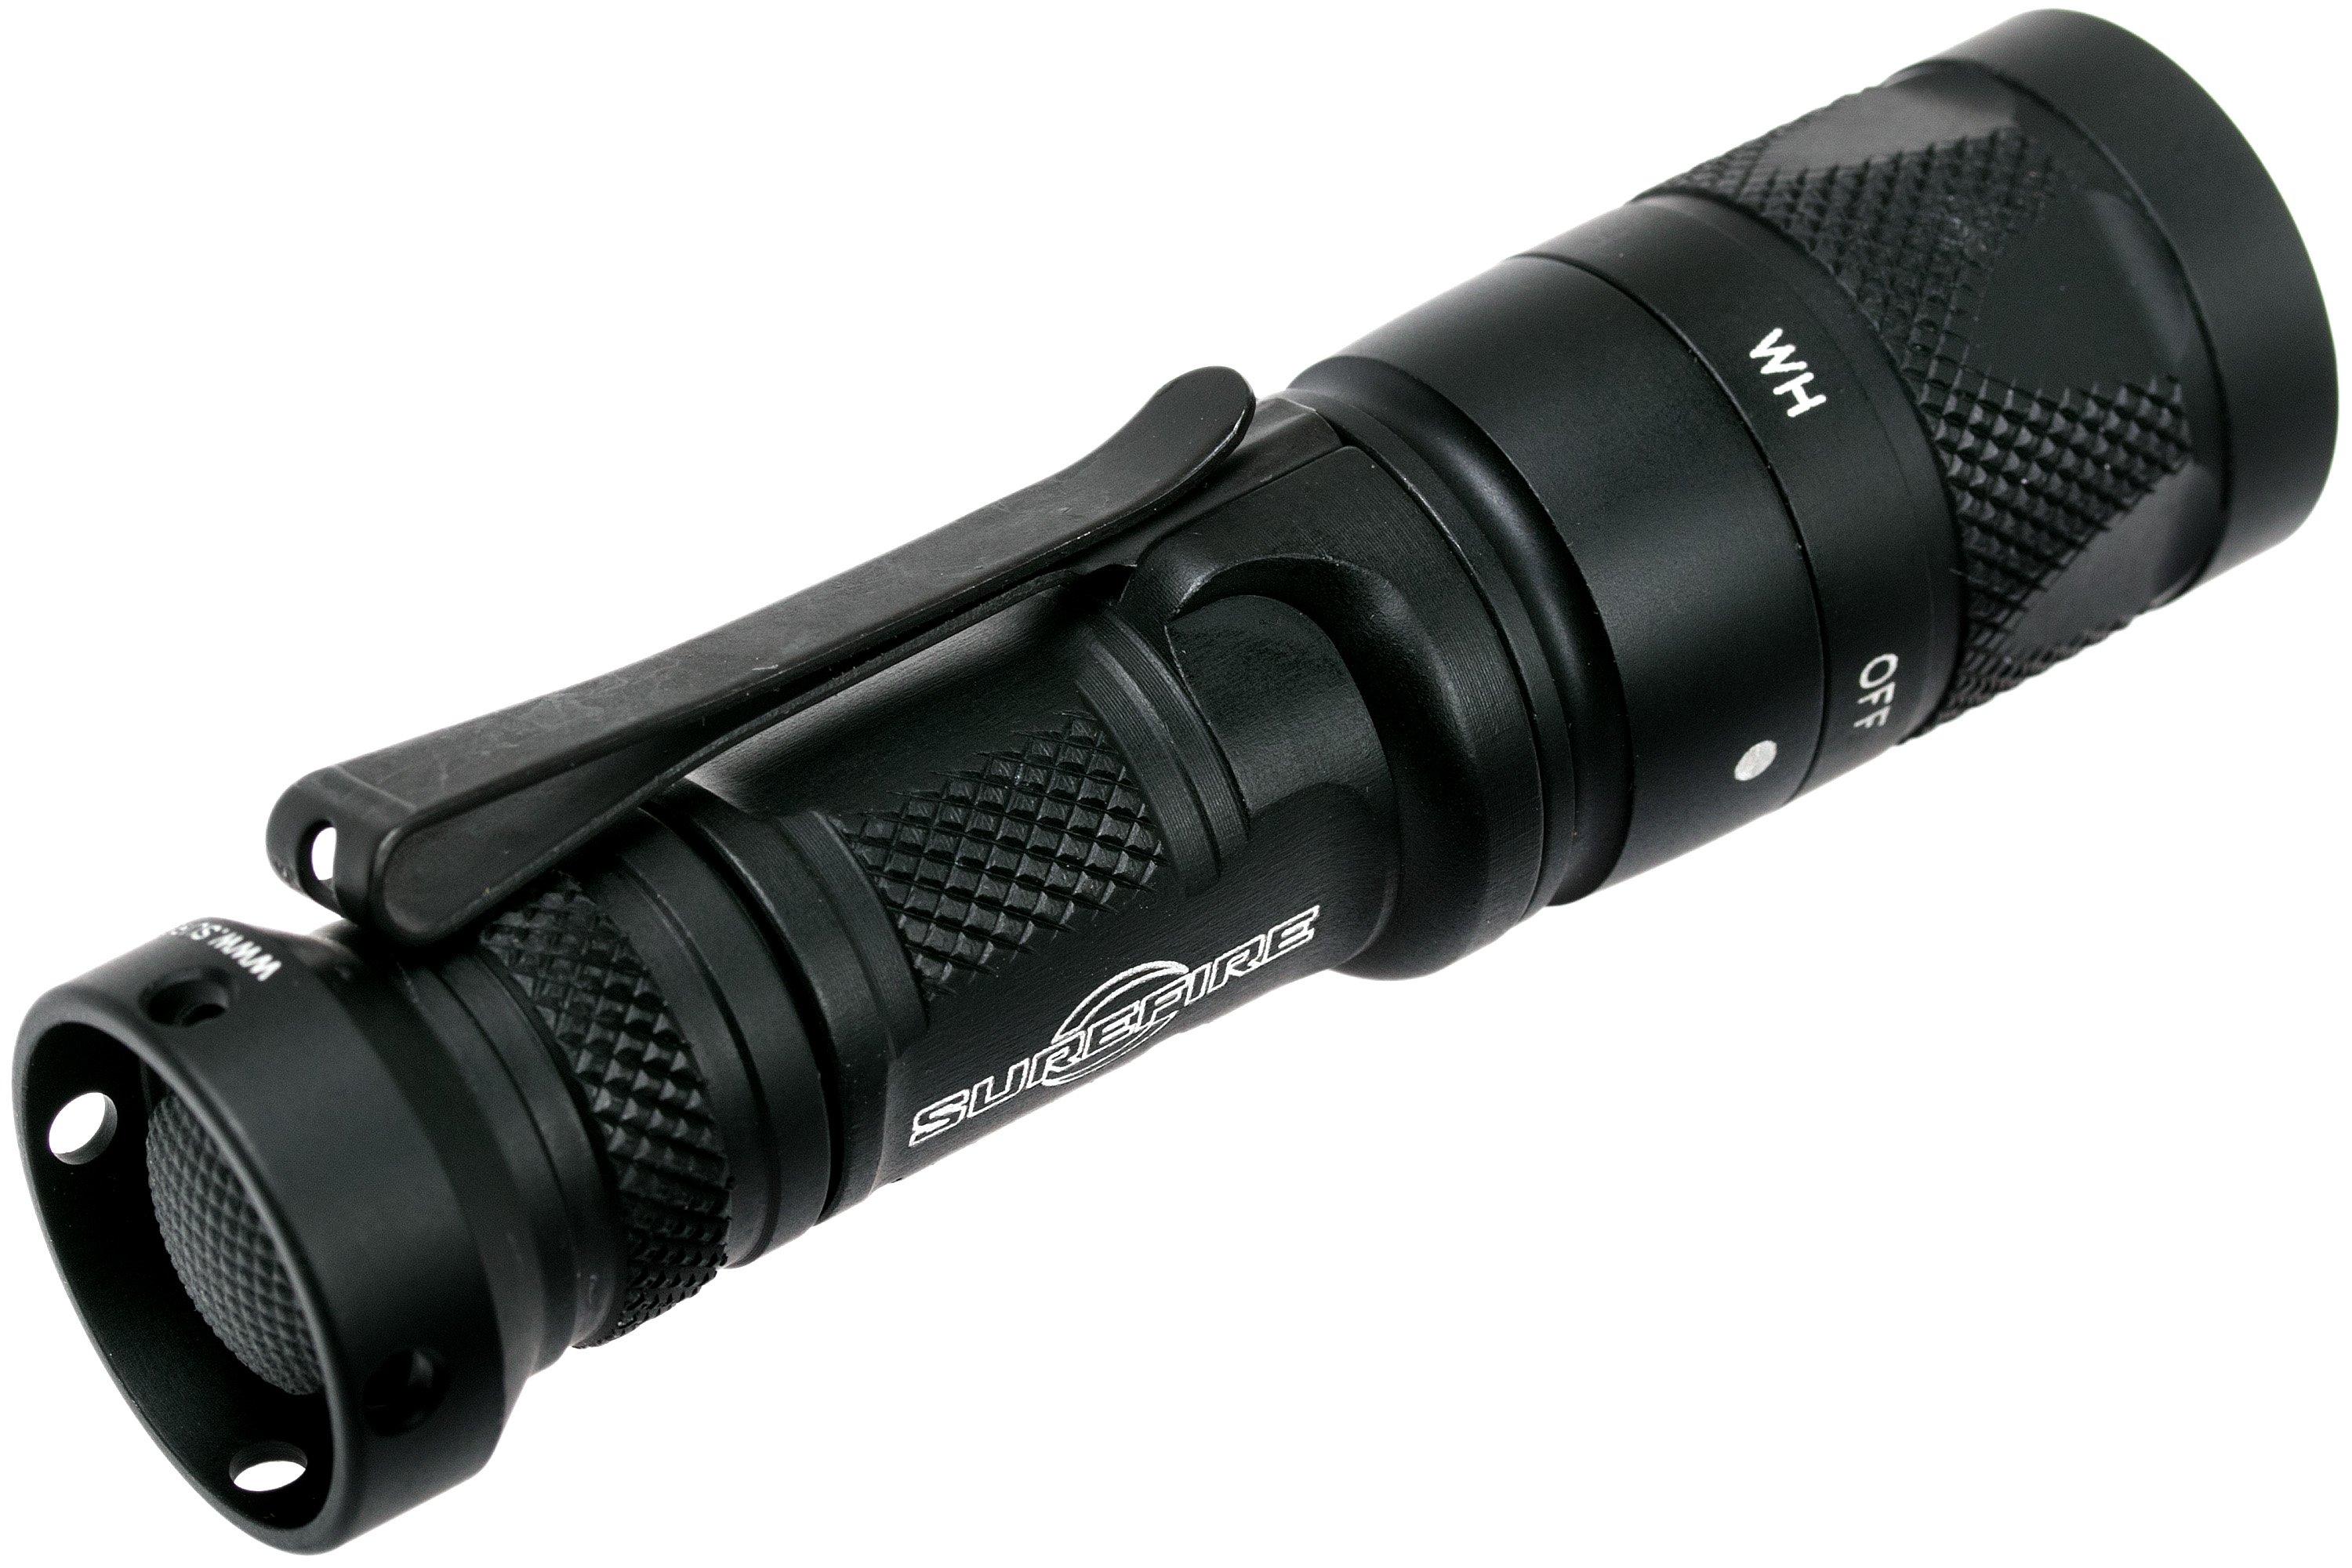 SureFire Aviator red, 250 lumens | Advantageously shopping at